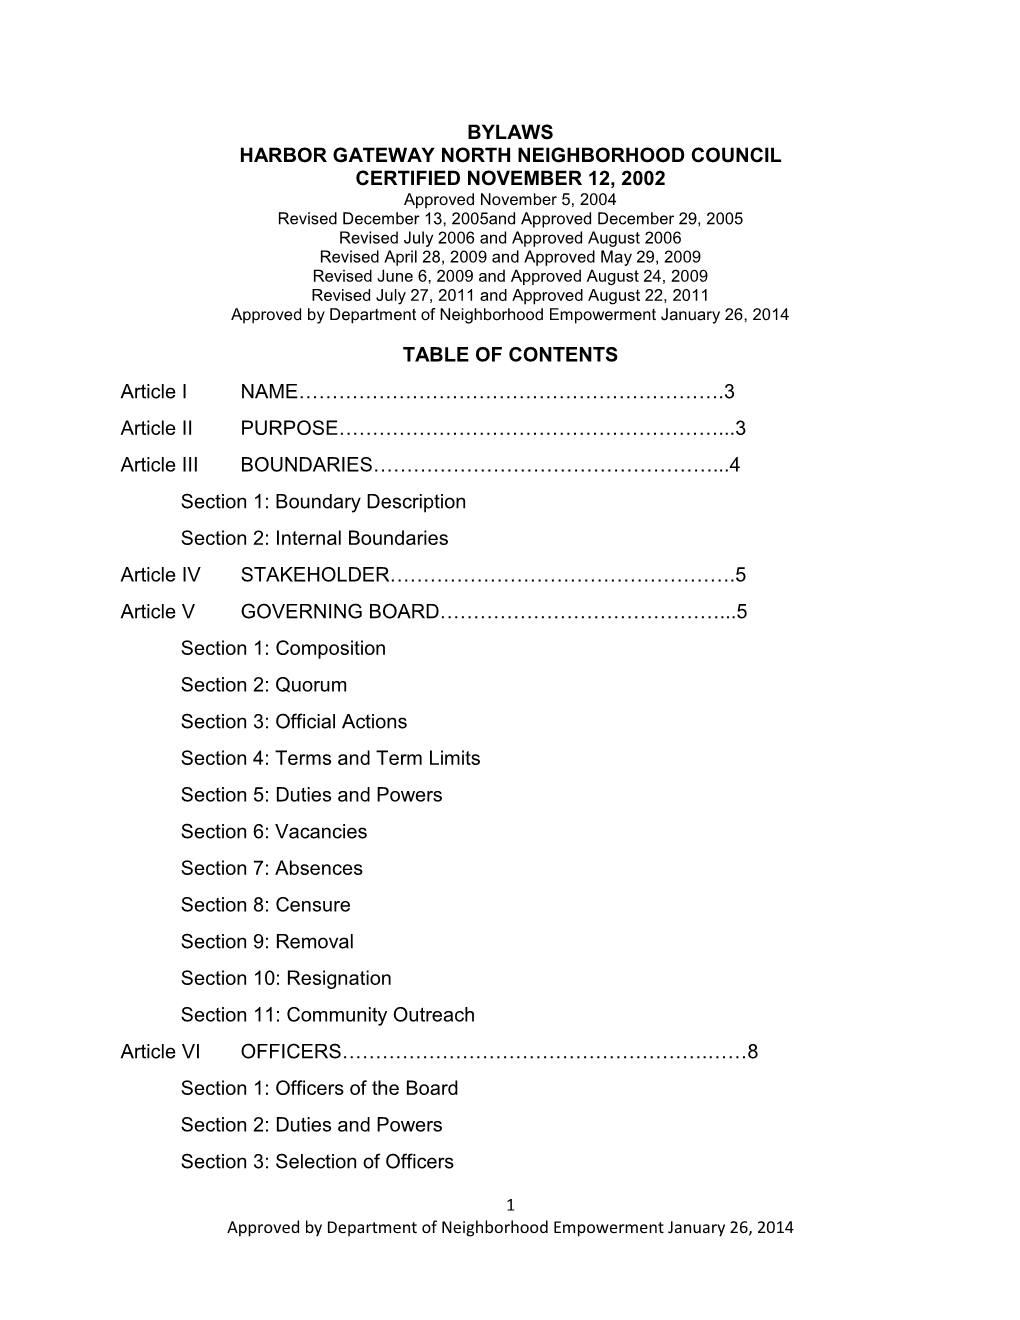 BYLAWS HARBOR GATEWAY NORTH NEIGHBORHOOD COUNCIL CERTIFIED NOVEMBER 12, 2002 TABLE of CONTENTS Article I NAME………………